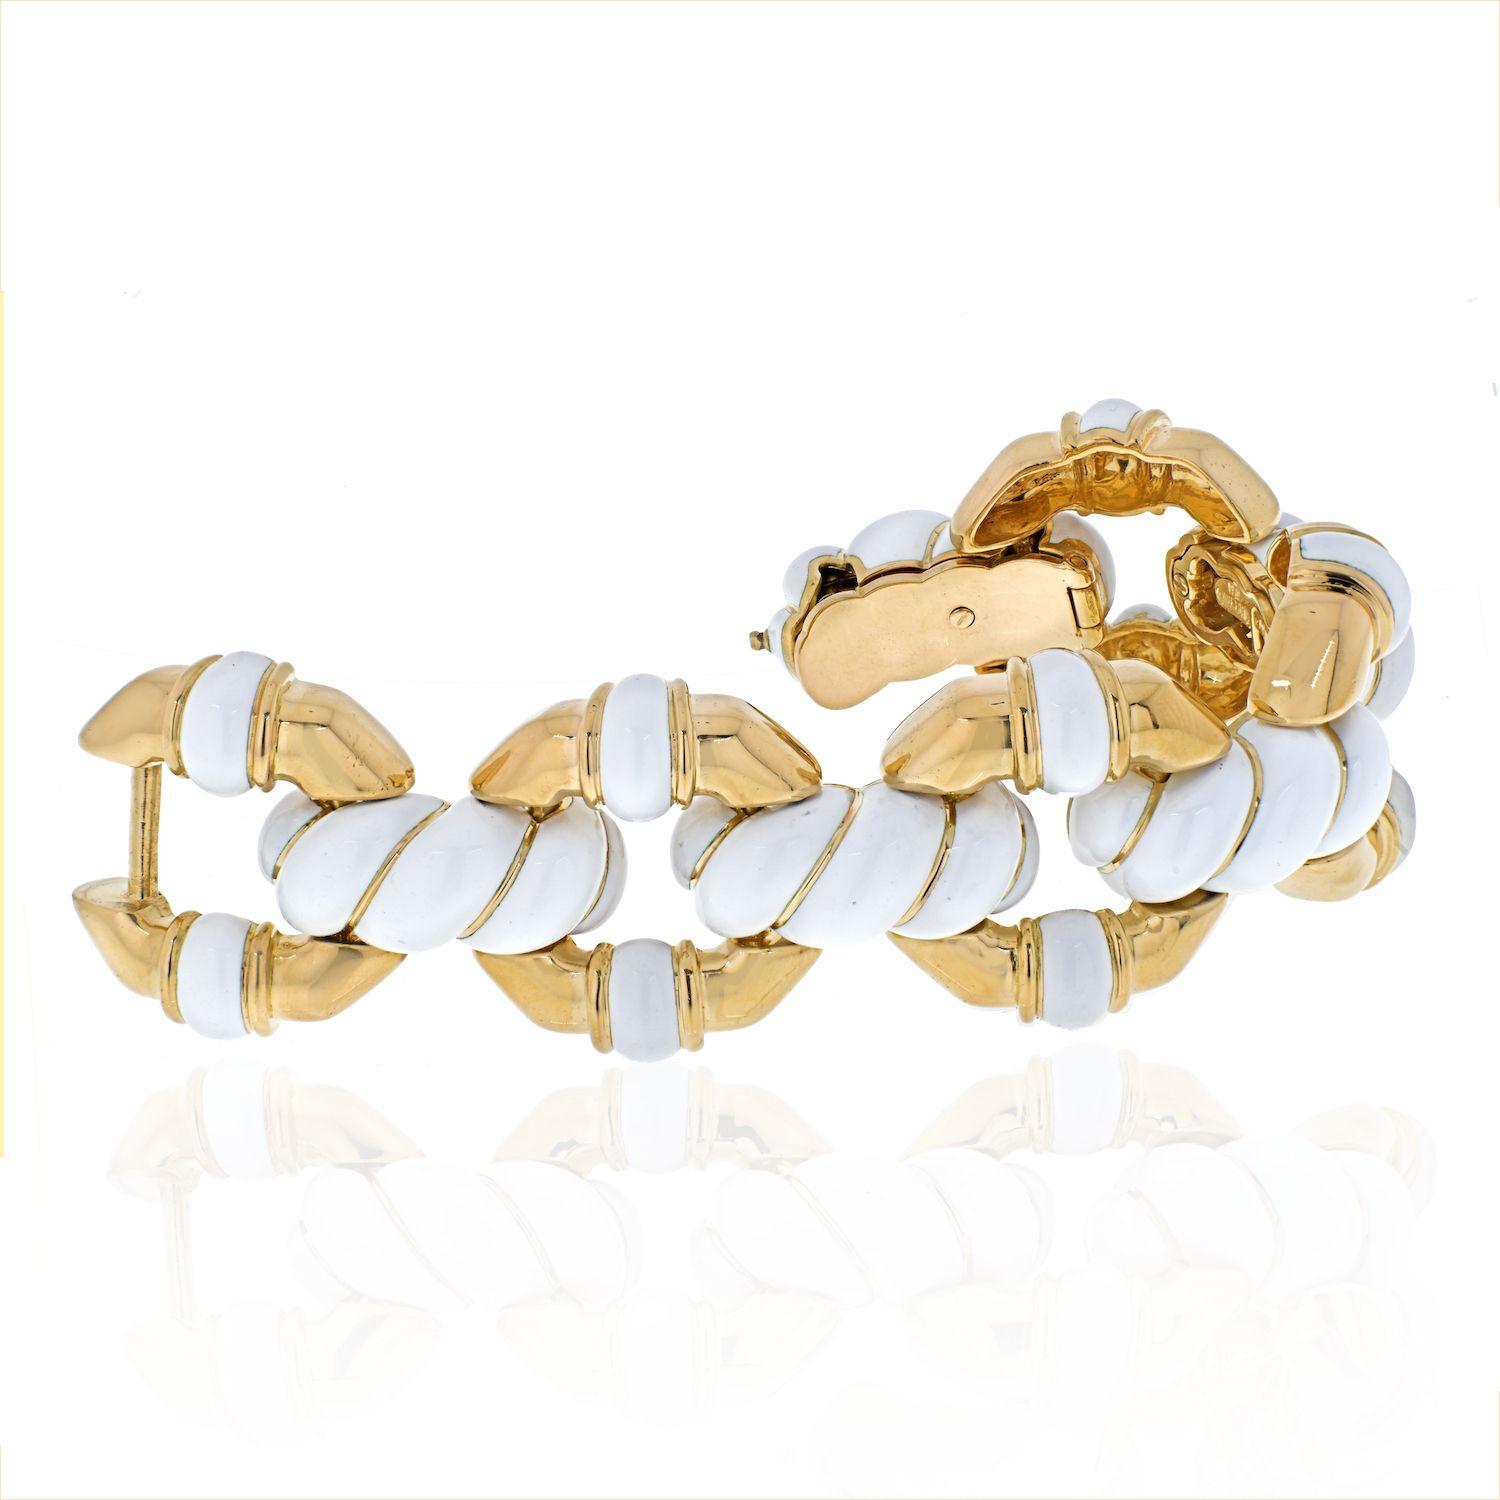 Summer glow looks good on you! This is one lovely fluted white enamel and gold link bracelet crafted in 18K yellow gold by an American designer David Webb which we feel looks great on during the summer months. Heavy to the feel you will know it's an